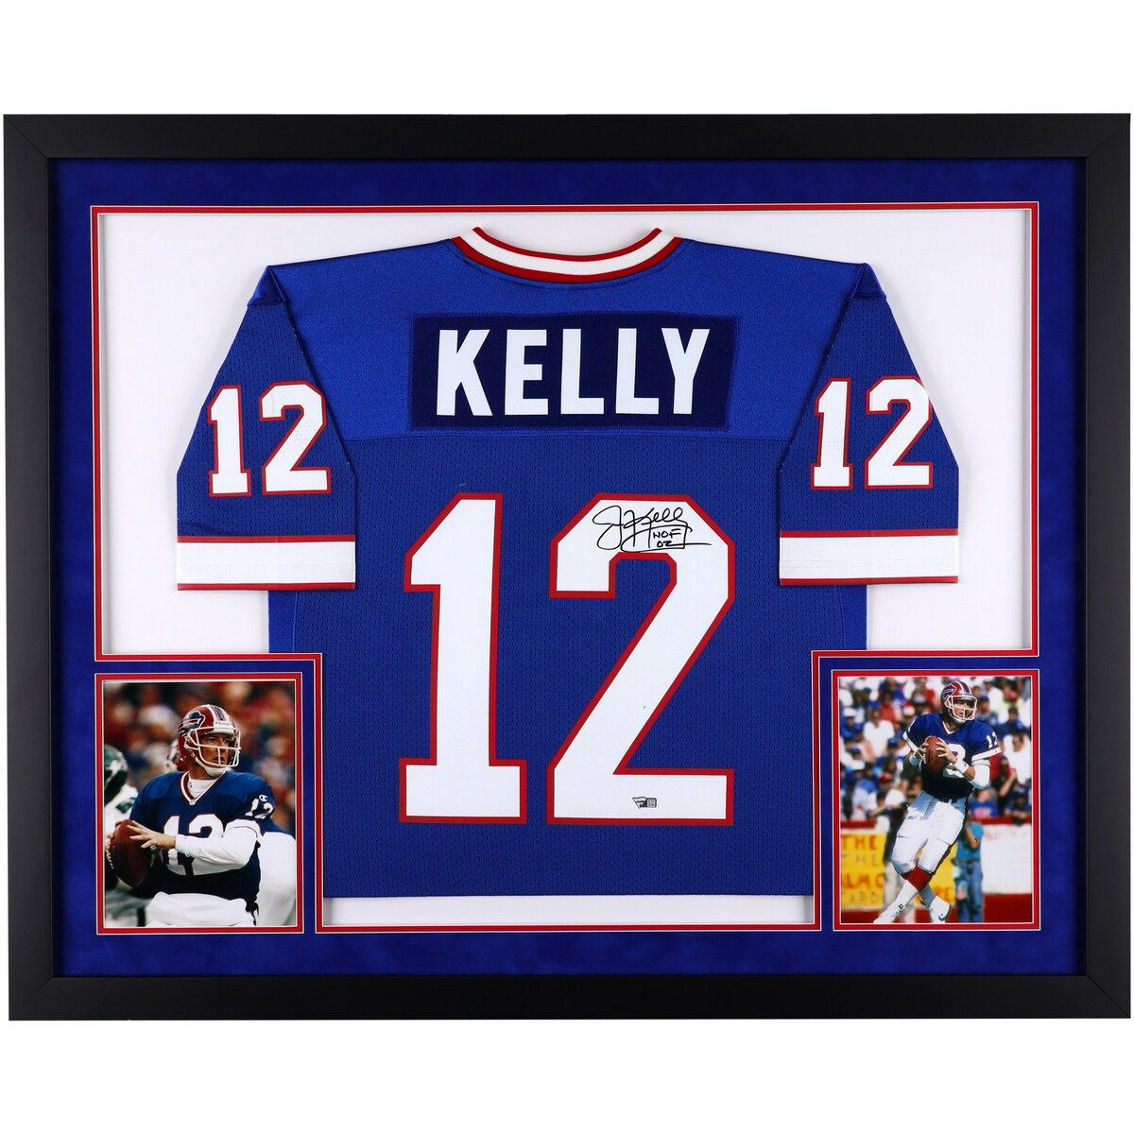 Fanatics Authentic Jim Kelly Buffalo Bills Autographed Framed Royal 1994 Authentic Jersey - Image 2 of 3